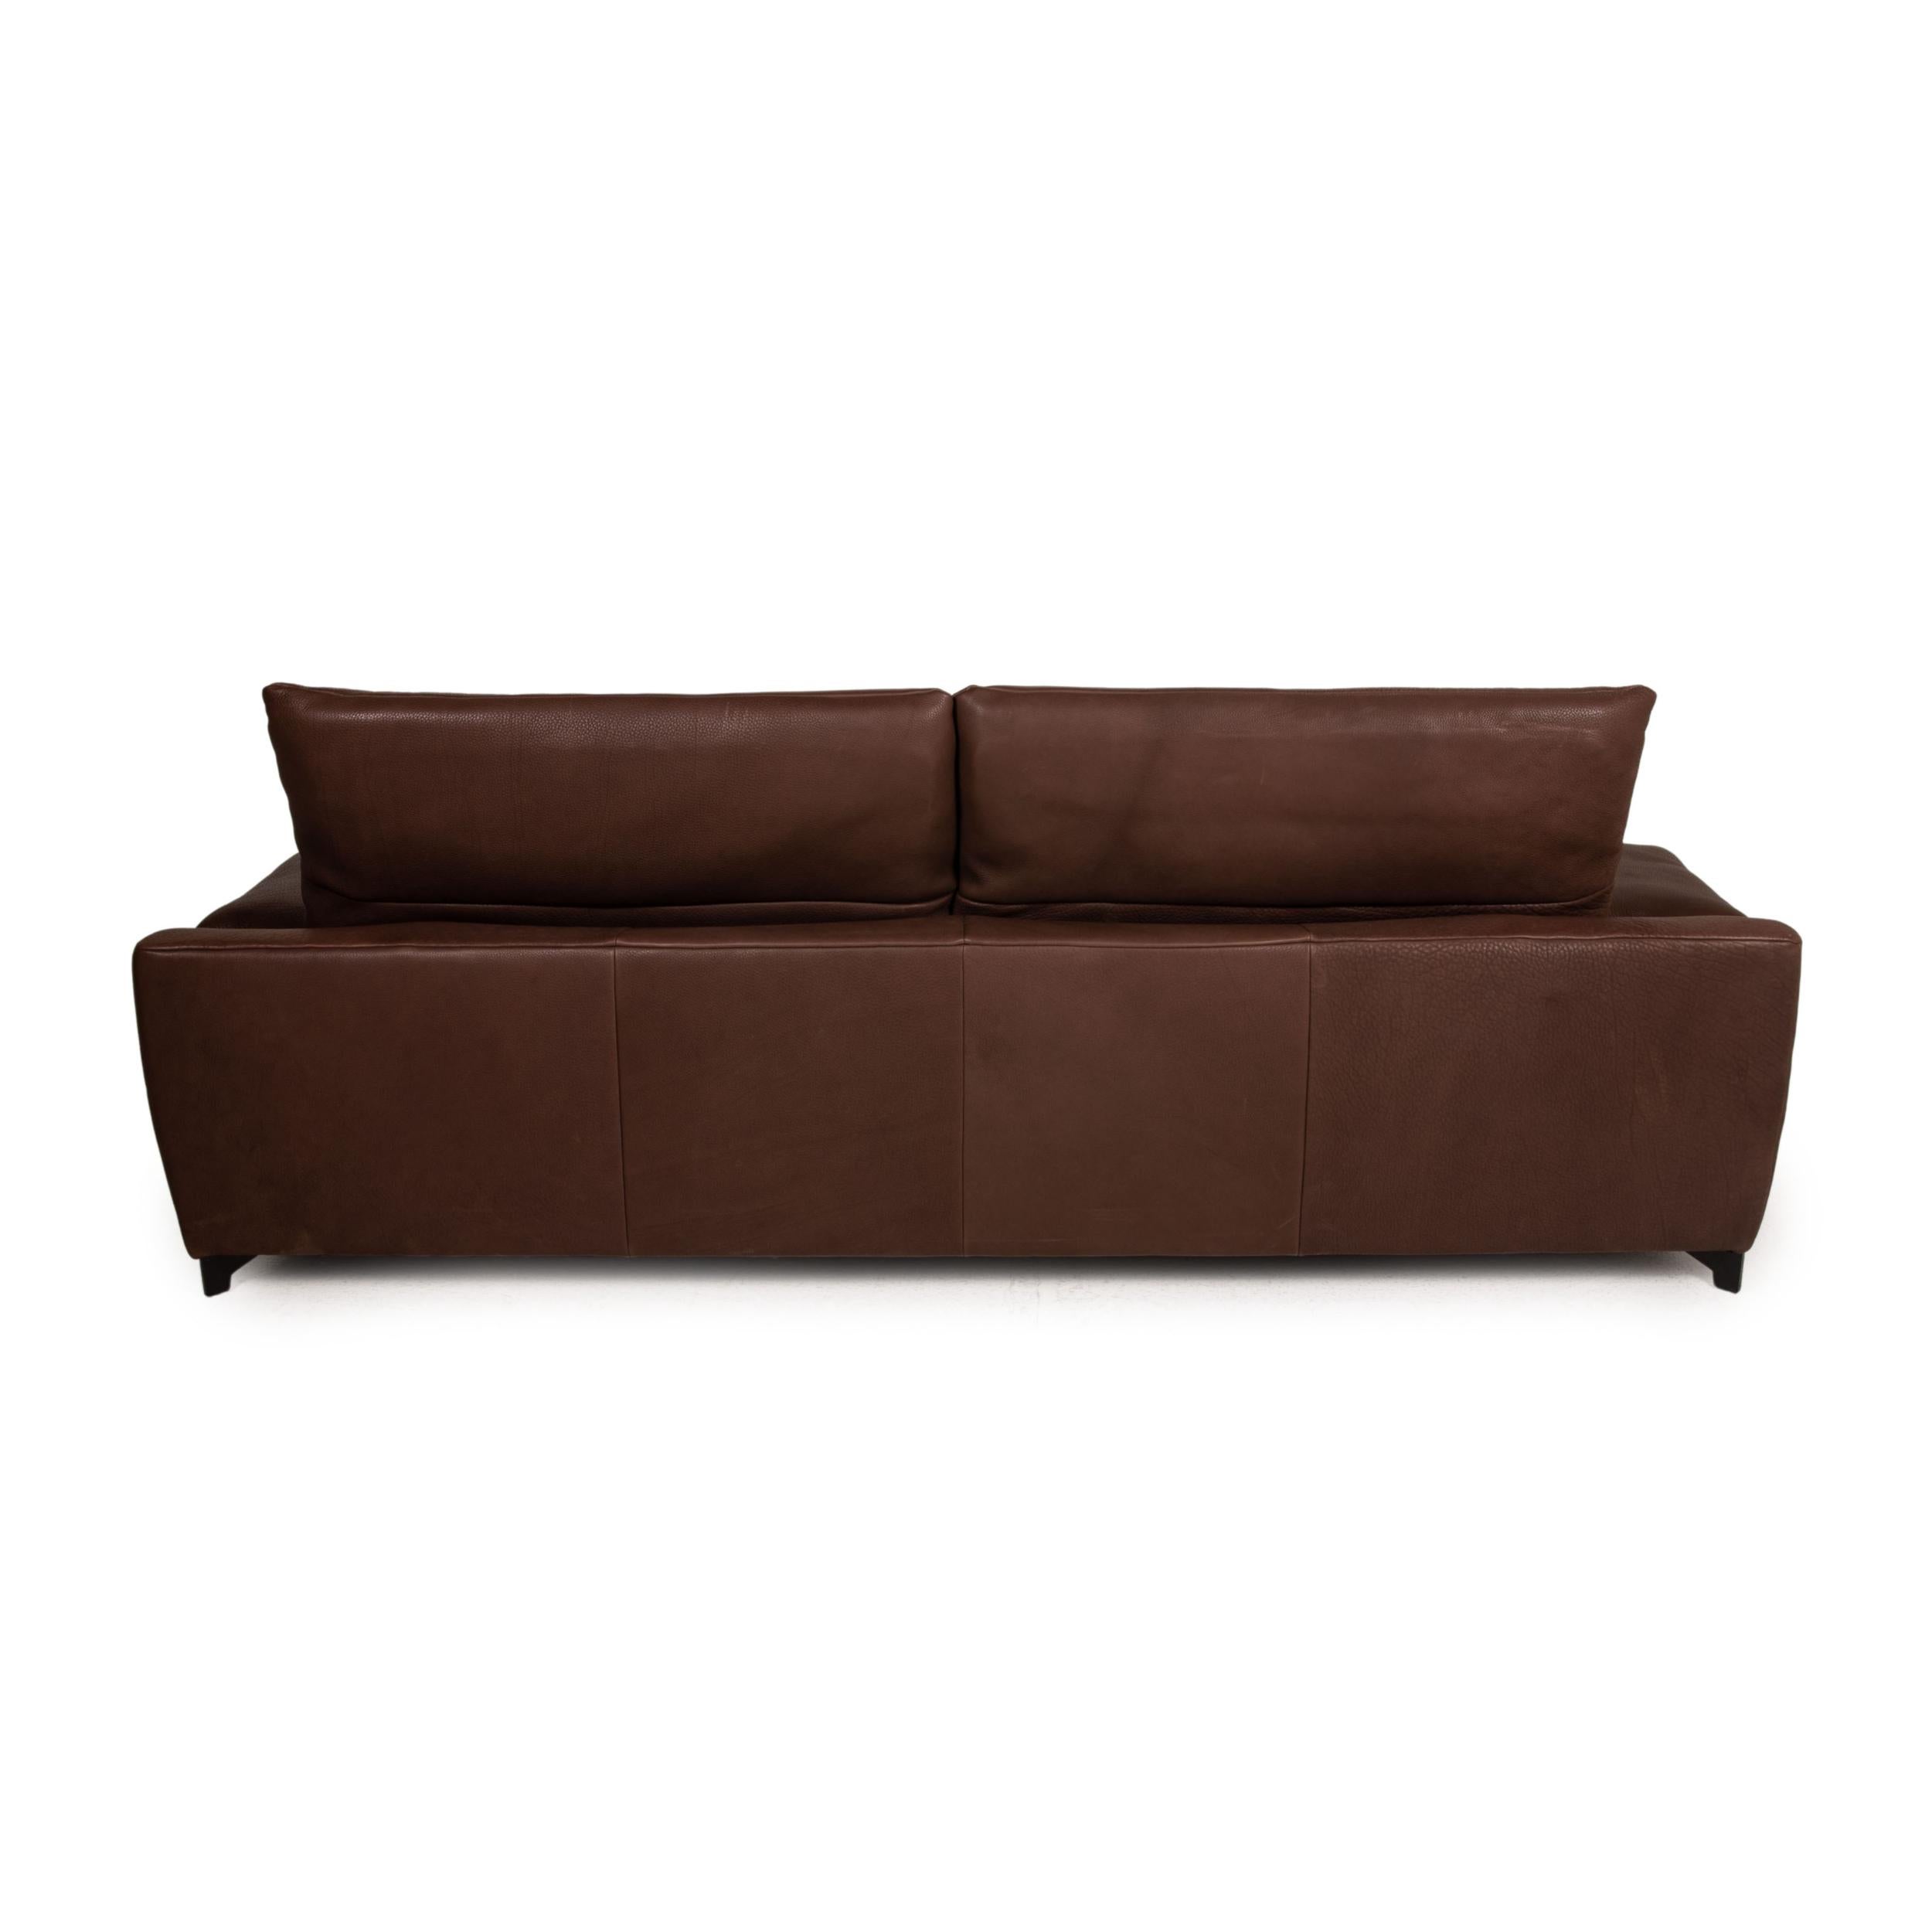 Who's Perfect Minnesota Leather Sofa Set Brown 1 Three-Seater 1 Stool Function For Sale 3